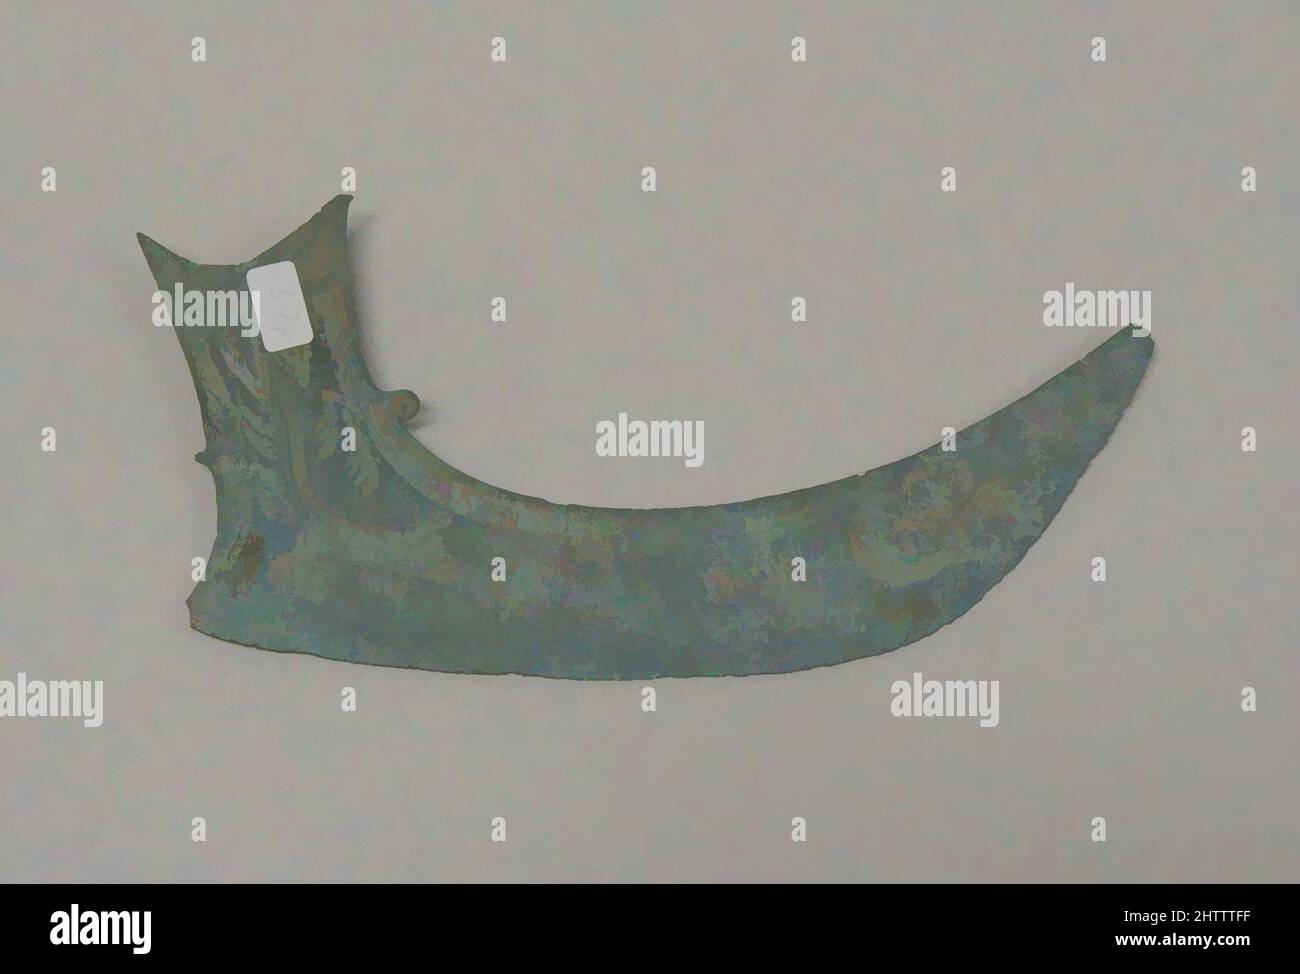 Art inspired by Boat-Shaped Hafted Ax, Bronze and Iron Age period, Dongson culture, 500 B.C.–A.D. 300, Vietnam (North), Bronze, H. 4 1/2 in. (11.4 cm); W. 7 3/16 in. (18.3 cm); D. 3/4 in. (1.9 cm), Metalwork, Classic works modernized by Artotop with a splash of modernity. Shapes, color and value, eye-catching visual impact on art. Emotions through freedom of artworks in a contemporary way. A timeless message pursuing a wildly creative new direction. Artists turning to the digital medium and creating the Artotop NFT Stock Photo